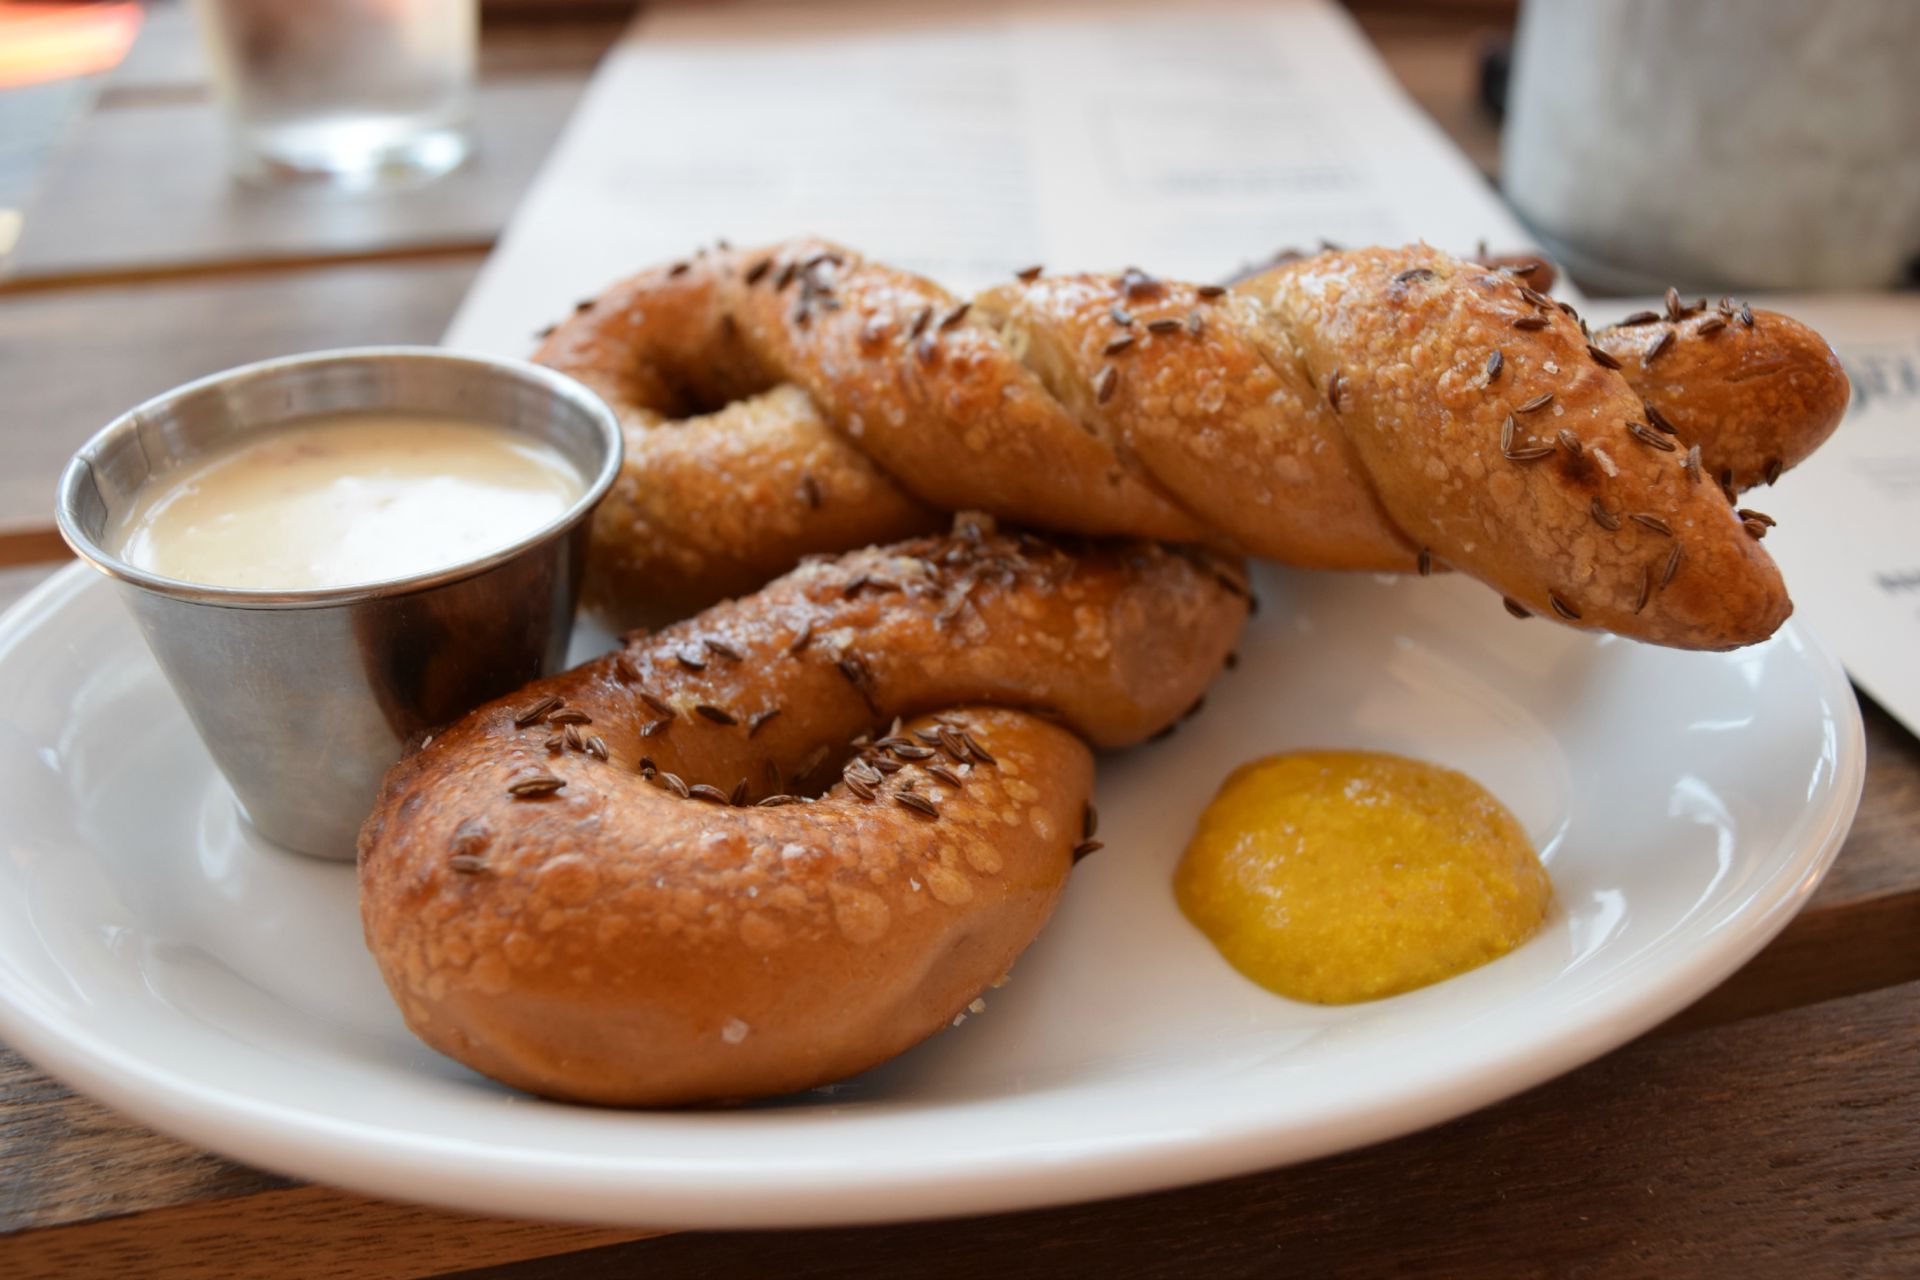 The soft pretzel with bacon fondue and mustard